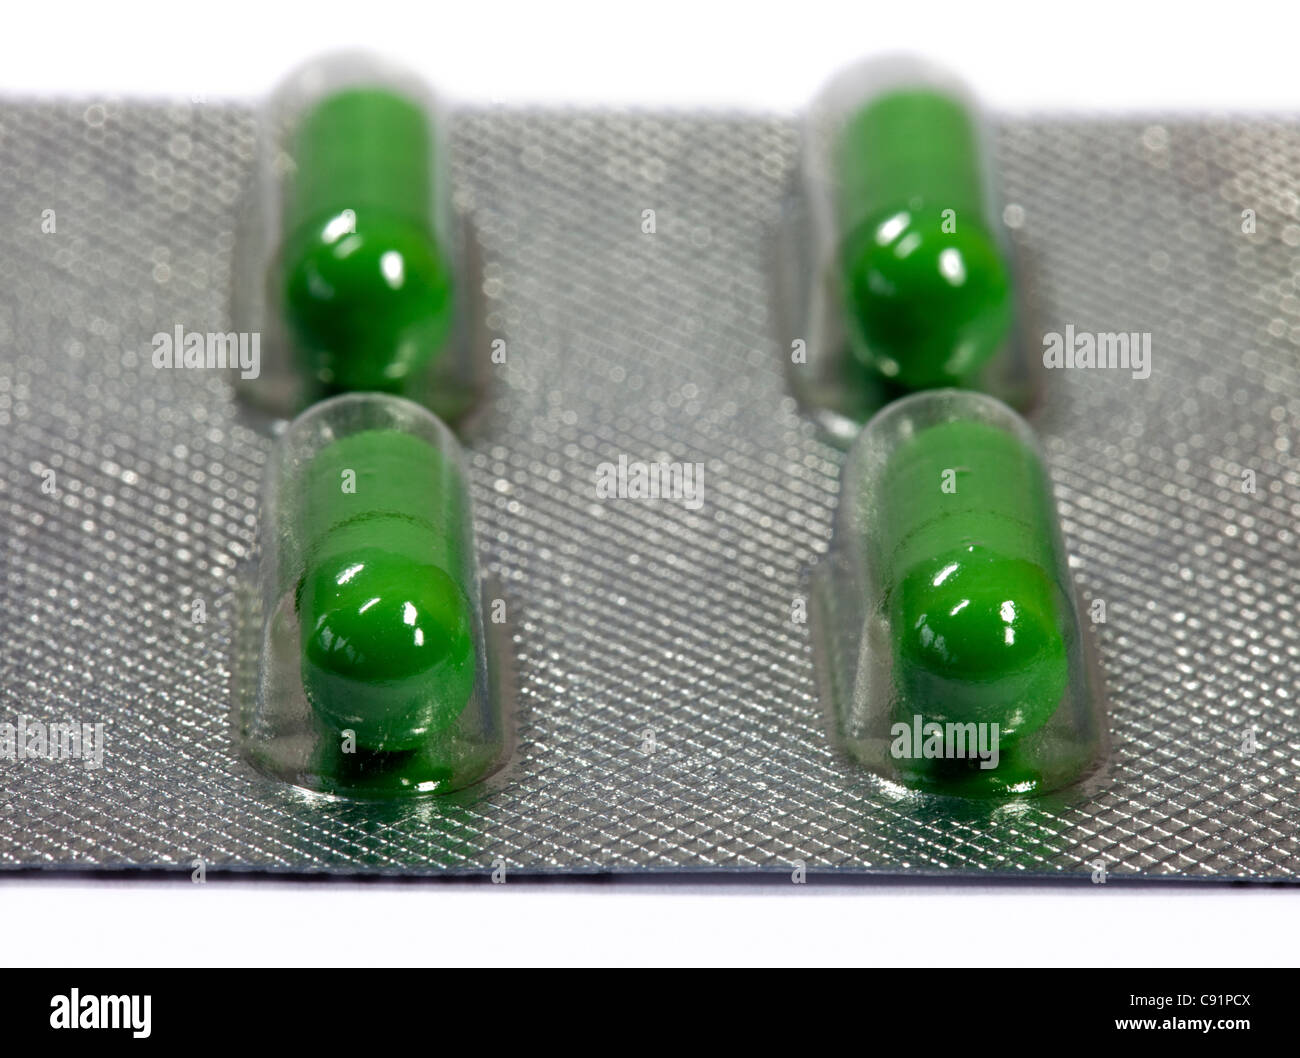 Fluoxetine Capsules (Prozac) in Blister Packaging Stock Photo